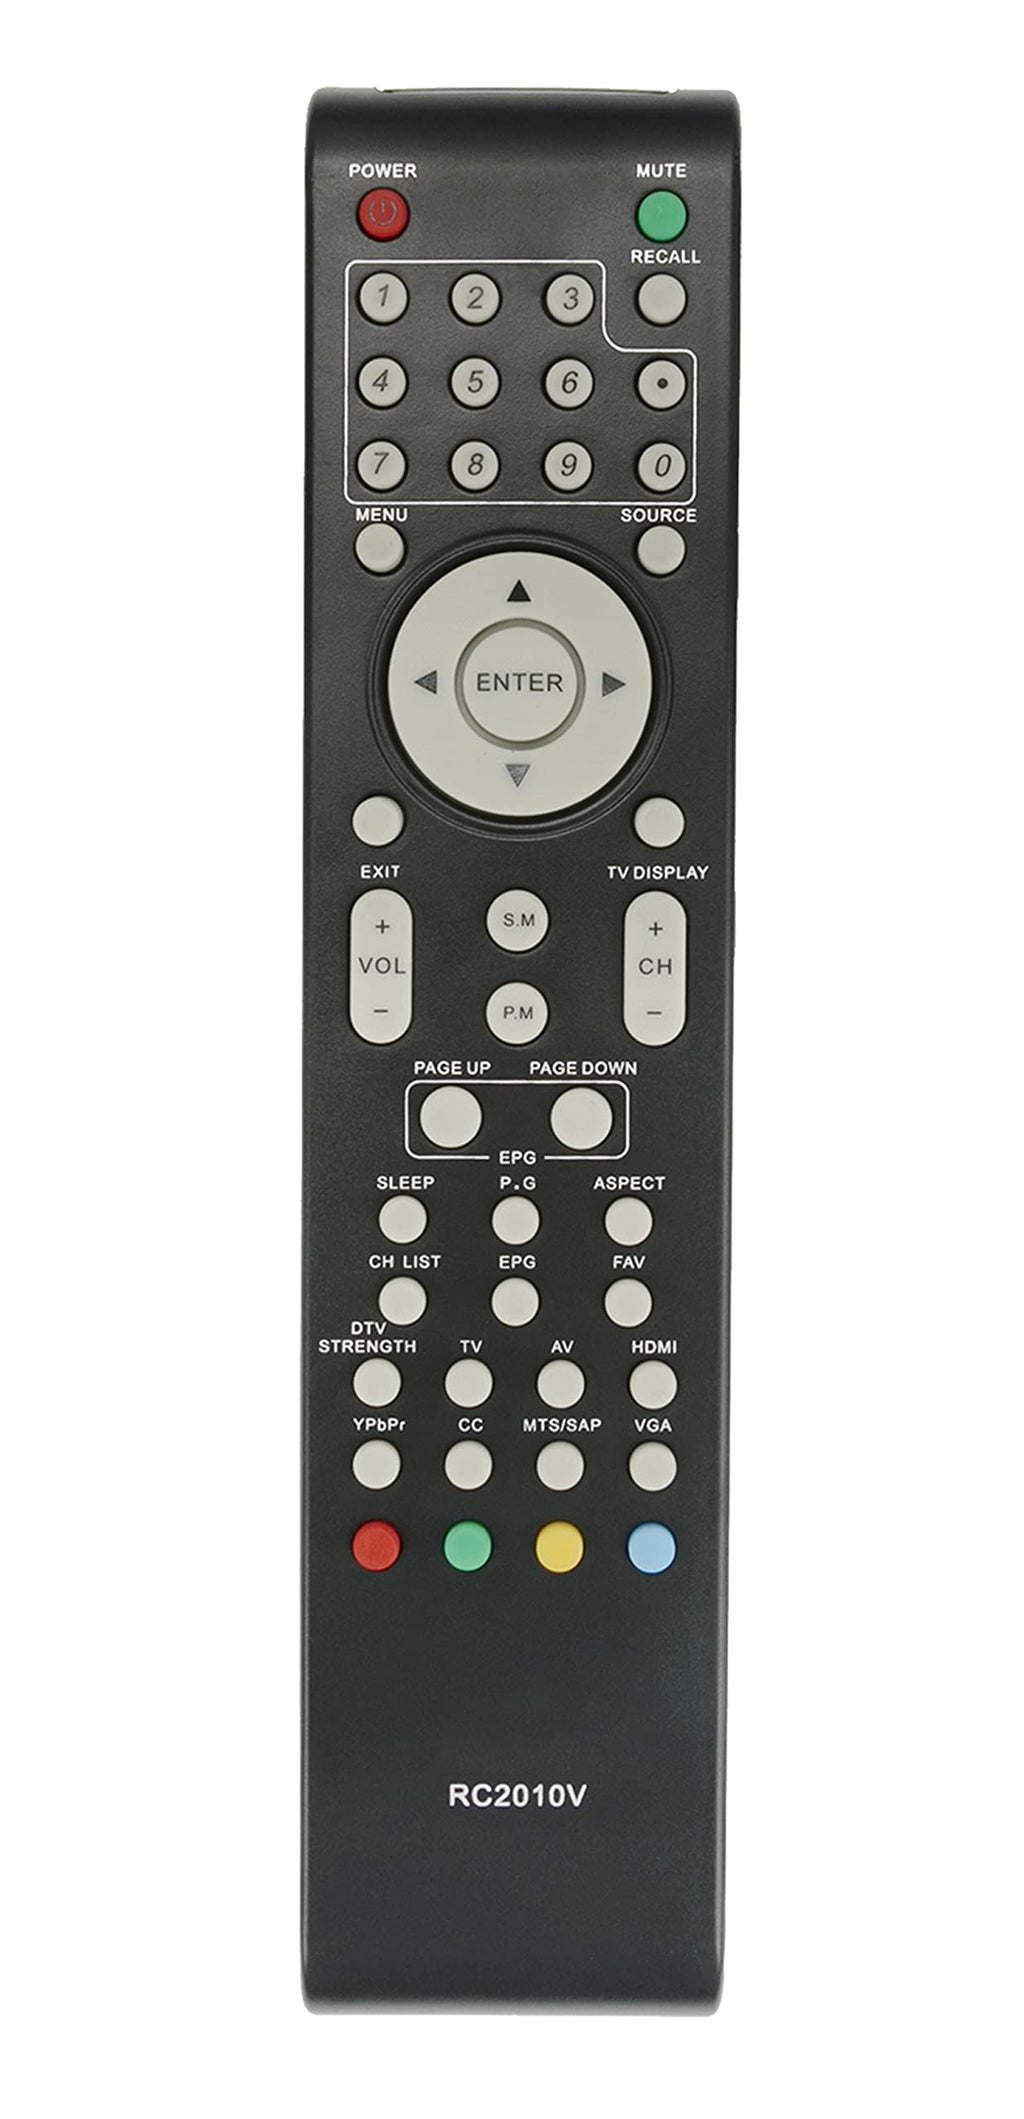 RC2010V Remote Control Replacement fit for VIORE TV LC37VF56 LC32VF56 LC26VF56 LC24VF56 LC22VF56 LC32VH70 LC42VF56 LC32VH56A LC26VH56 LC19VF56 LC37VH70M LC16VH56 LC22VH56PB LC19VH54PB LC22VH70